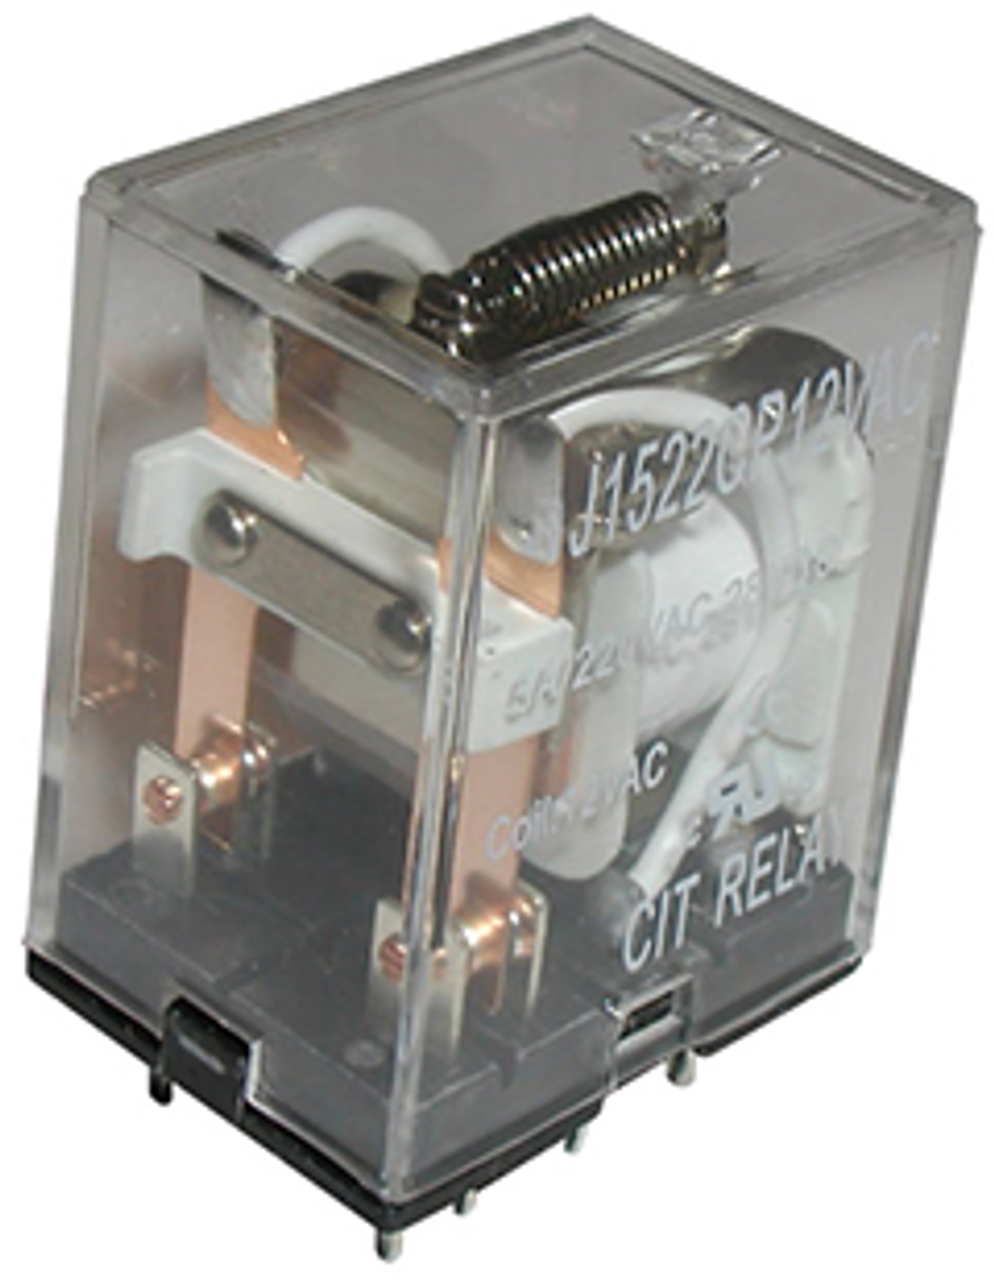 CIT Relay and Switch J1524CF110VDC Industrial Relays